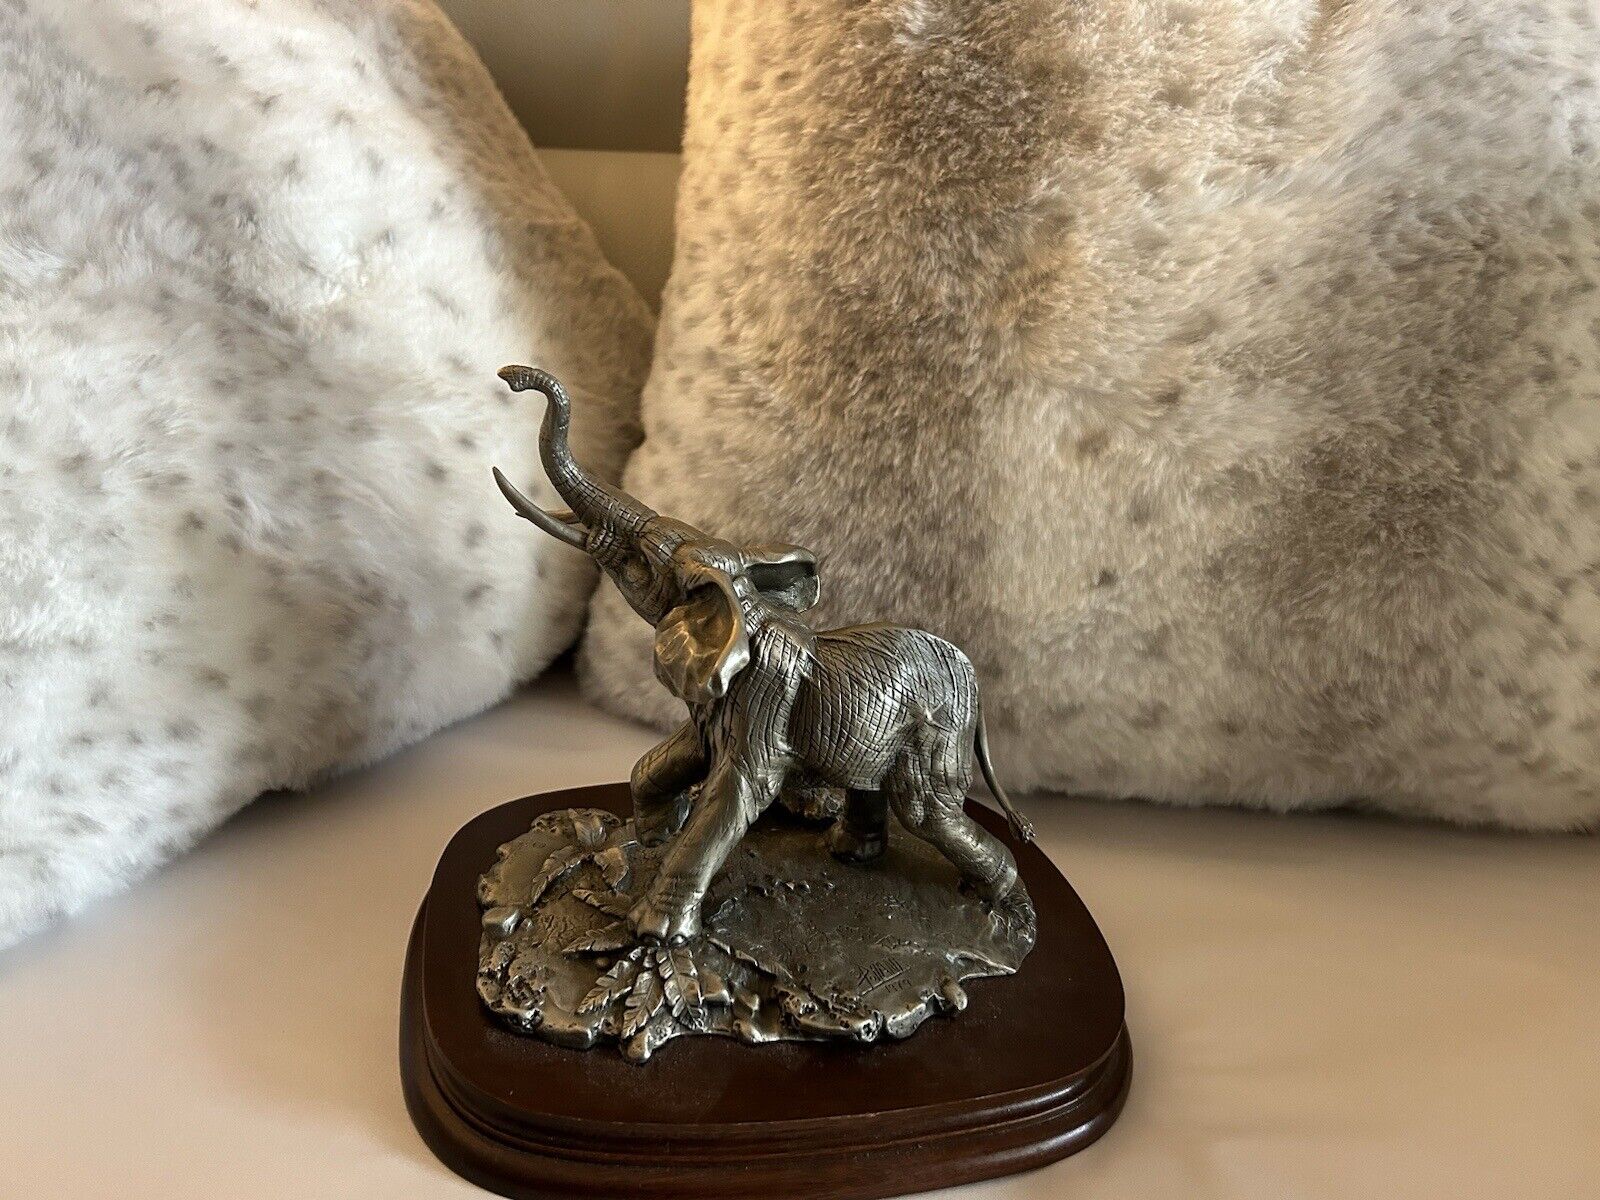 CHILMARK COLLECTORS EDITION PEWTER ELEPHANT STATUE Sculpted By Donald Polland